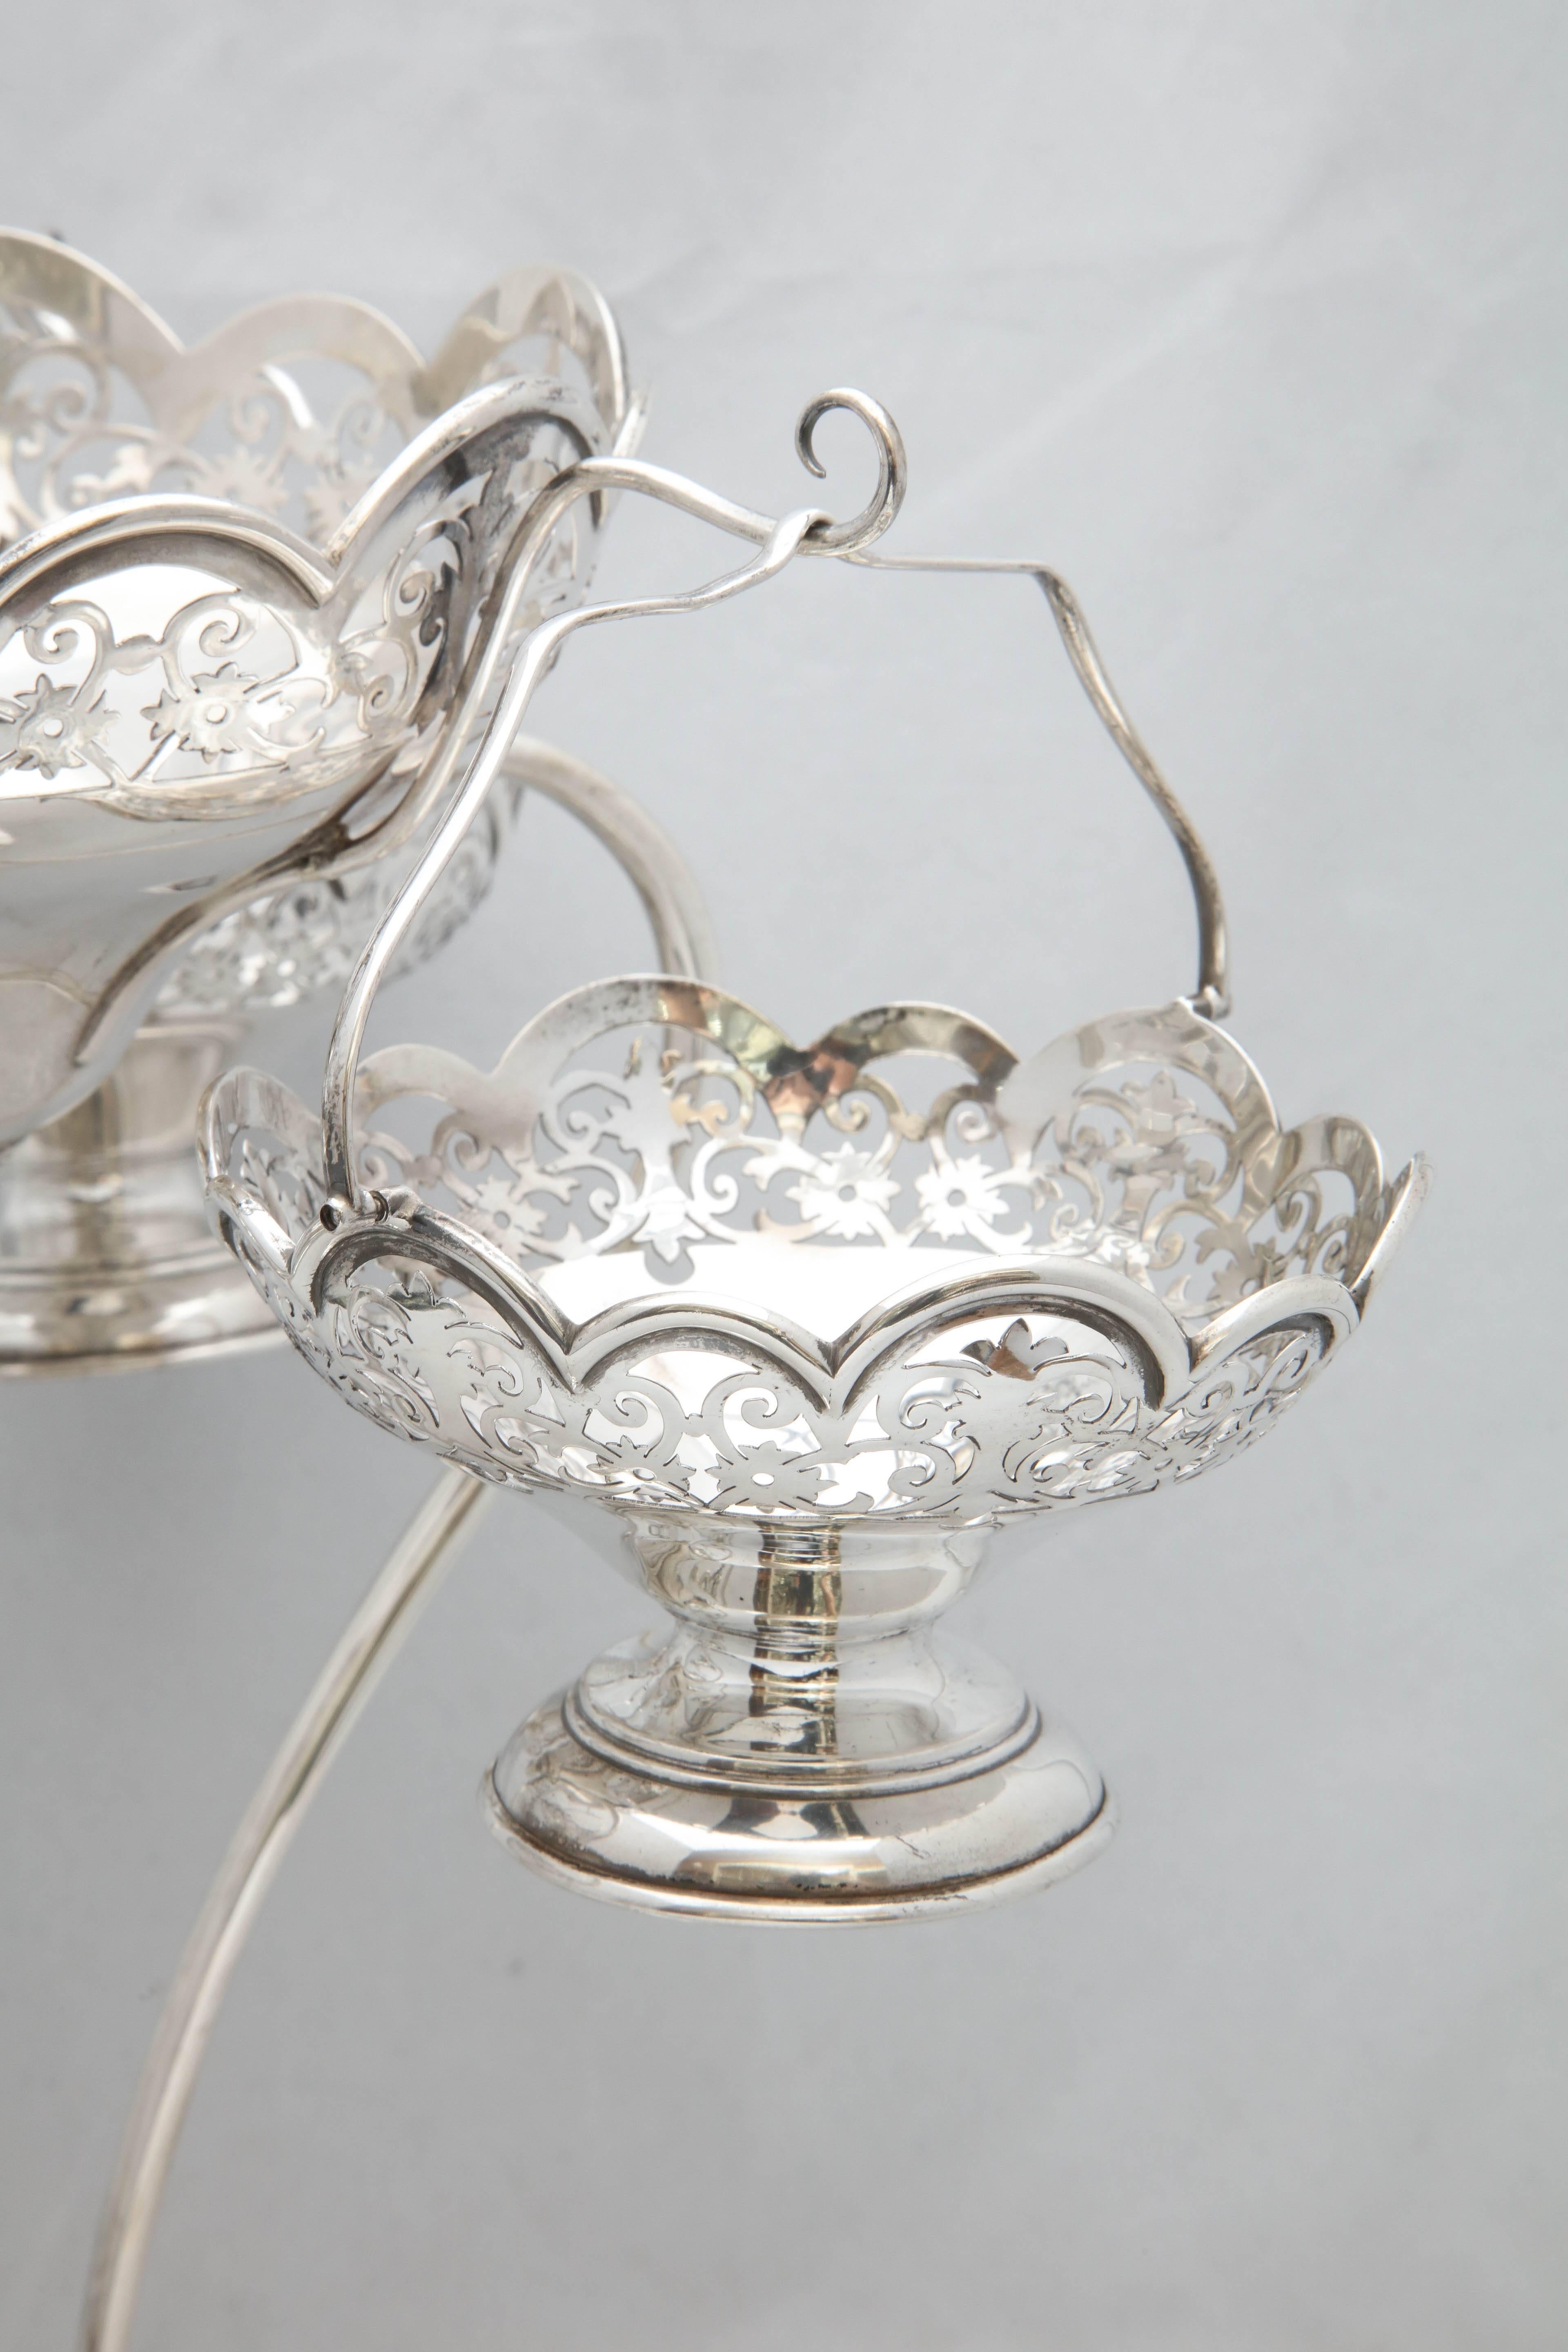 English Beautiful Edwardian Style George V Sterling Silver Epergne/Centerpiece For Sale